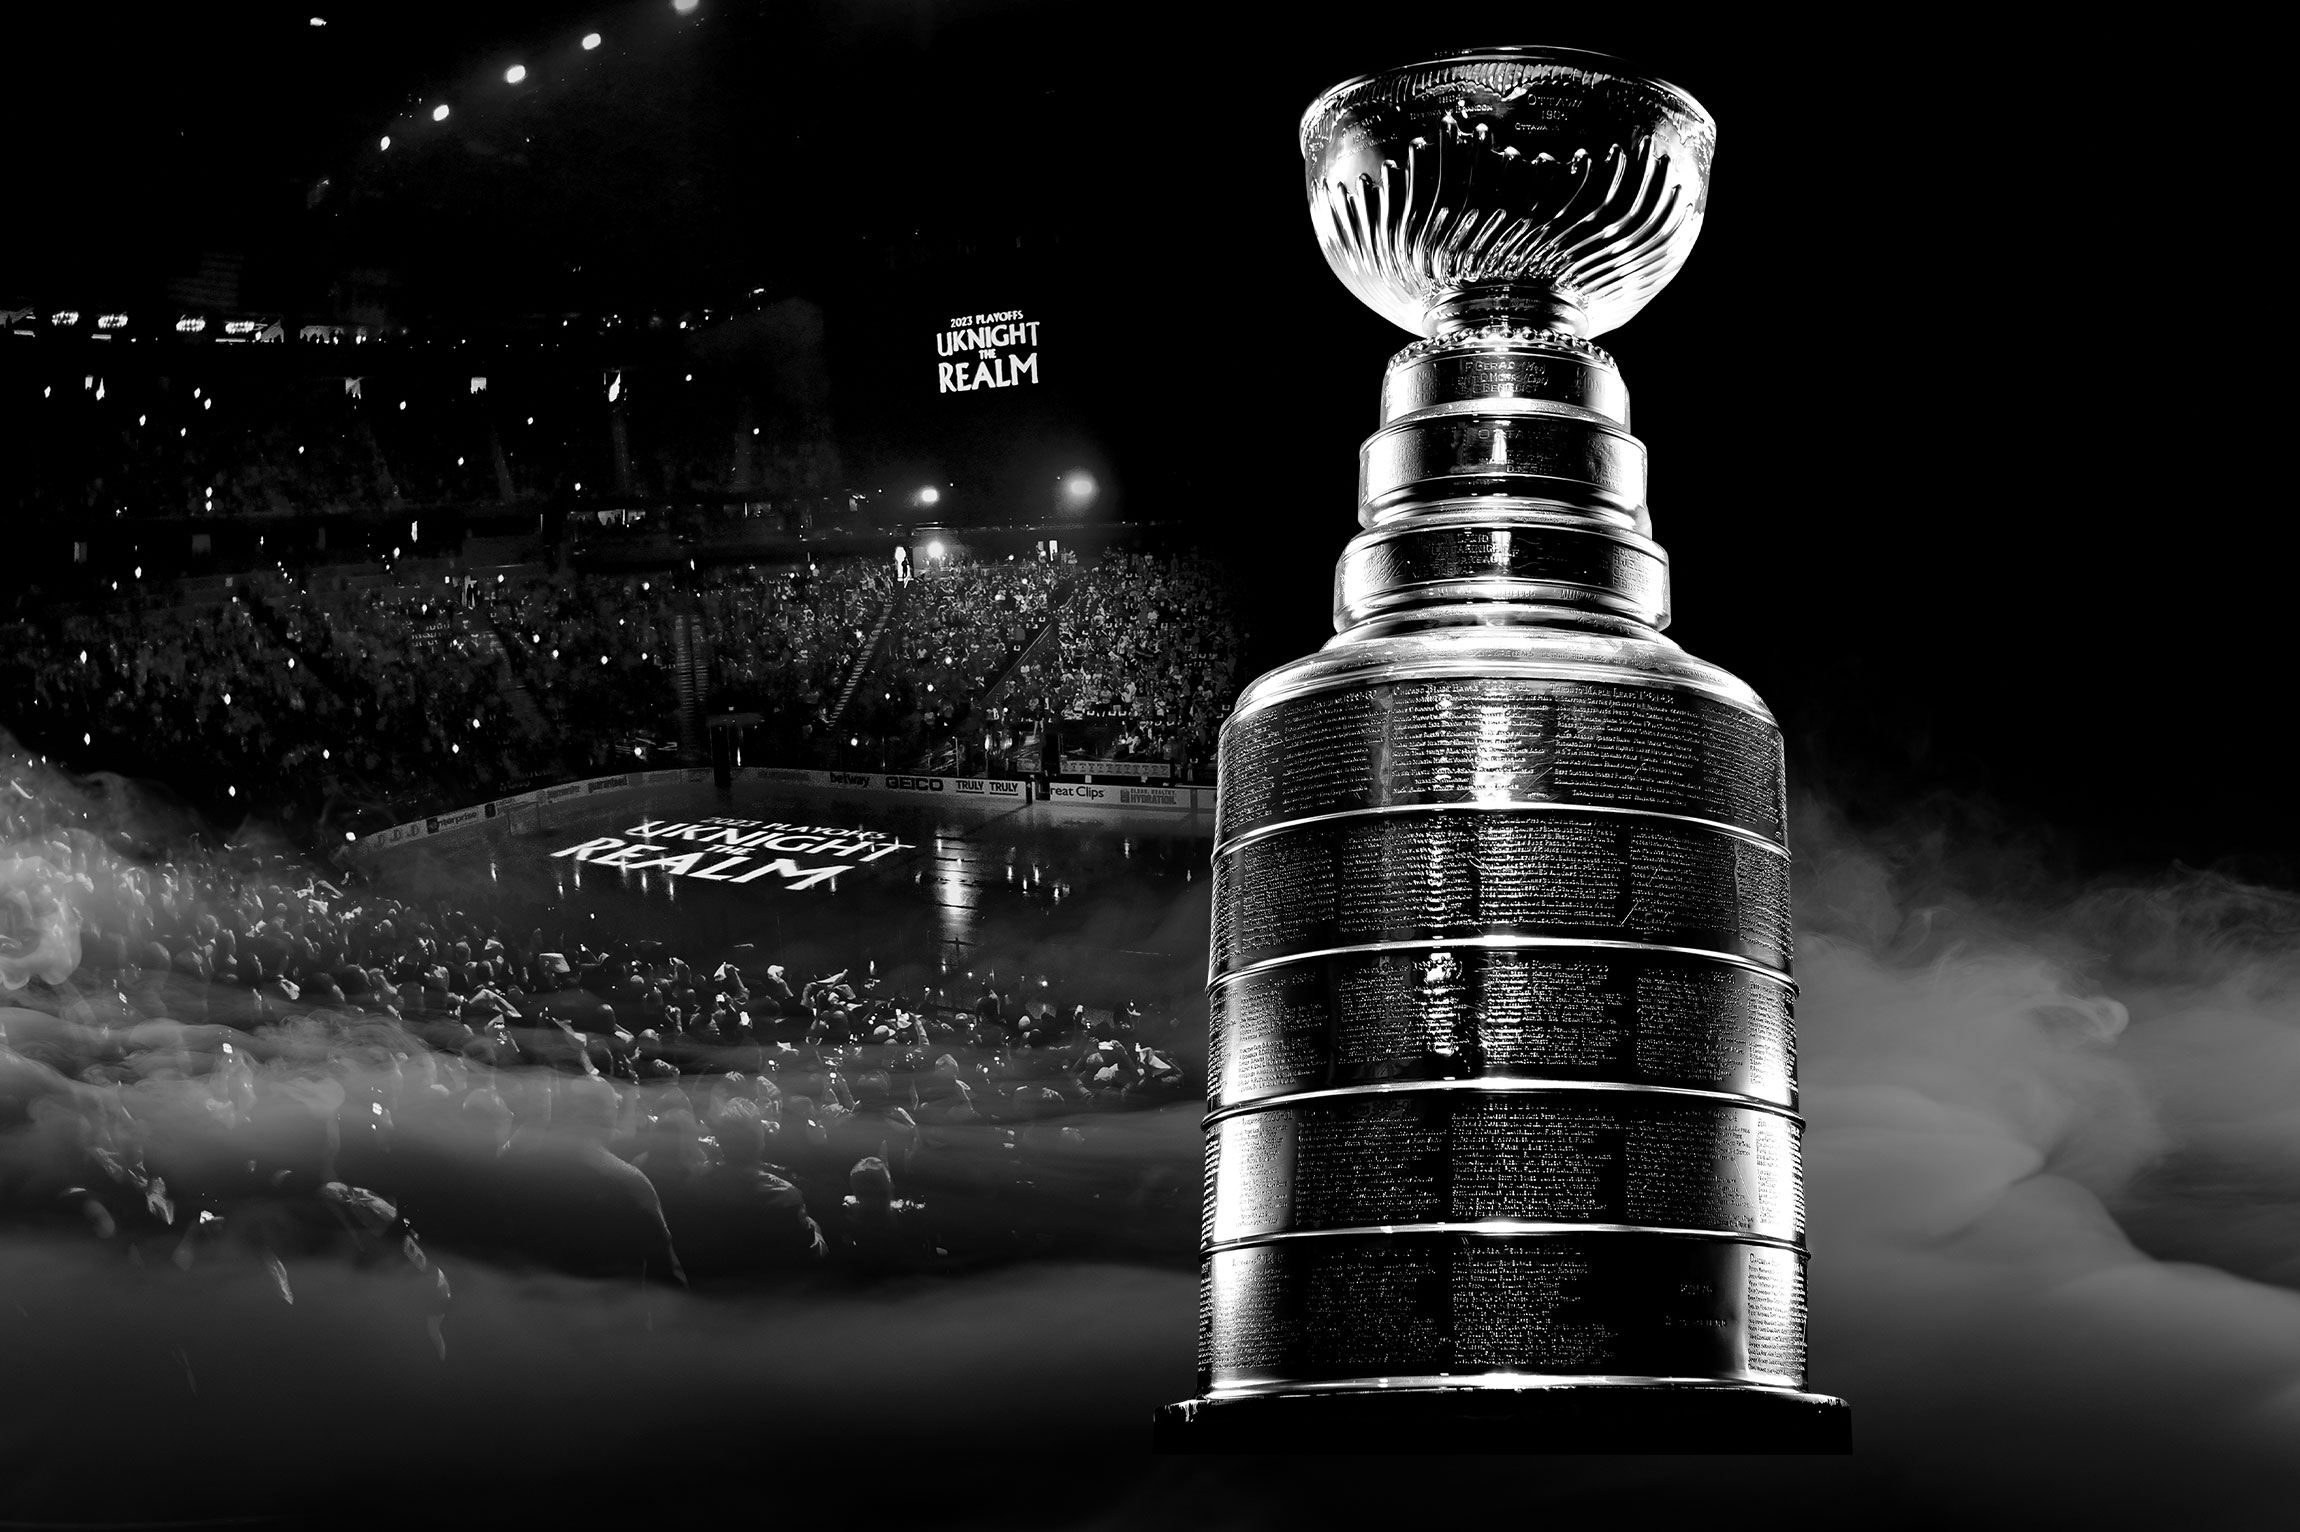 Get to know the Stanley Cup, the coveted NHL trophy captured by